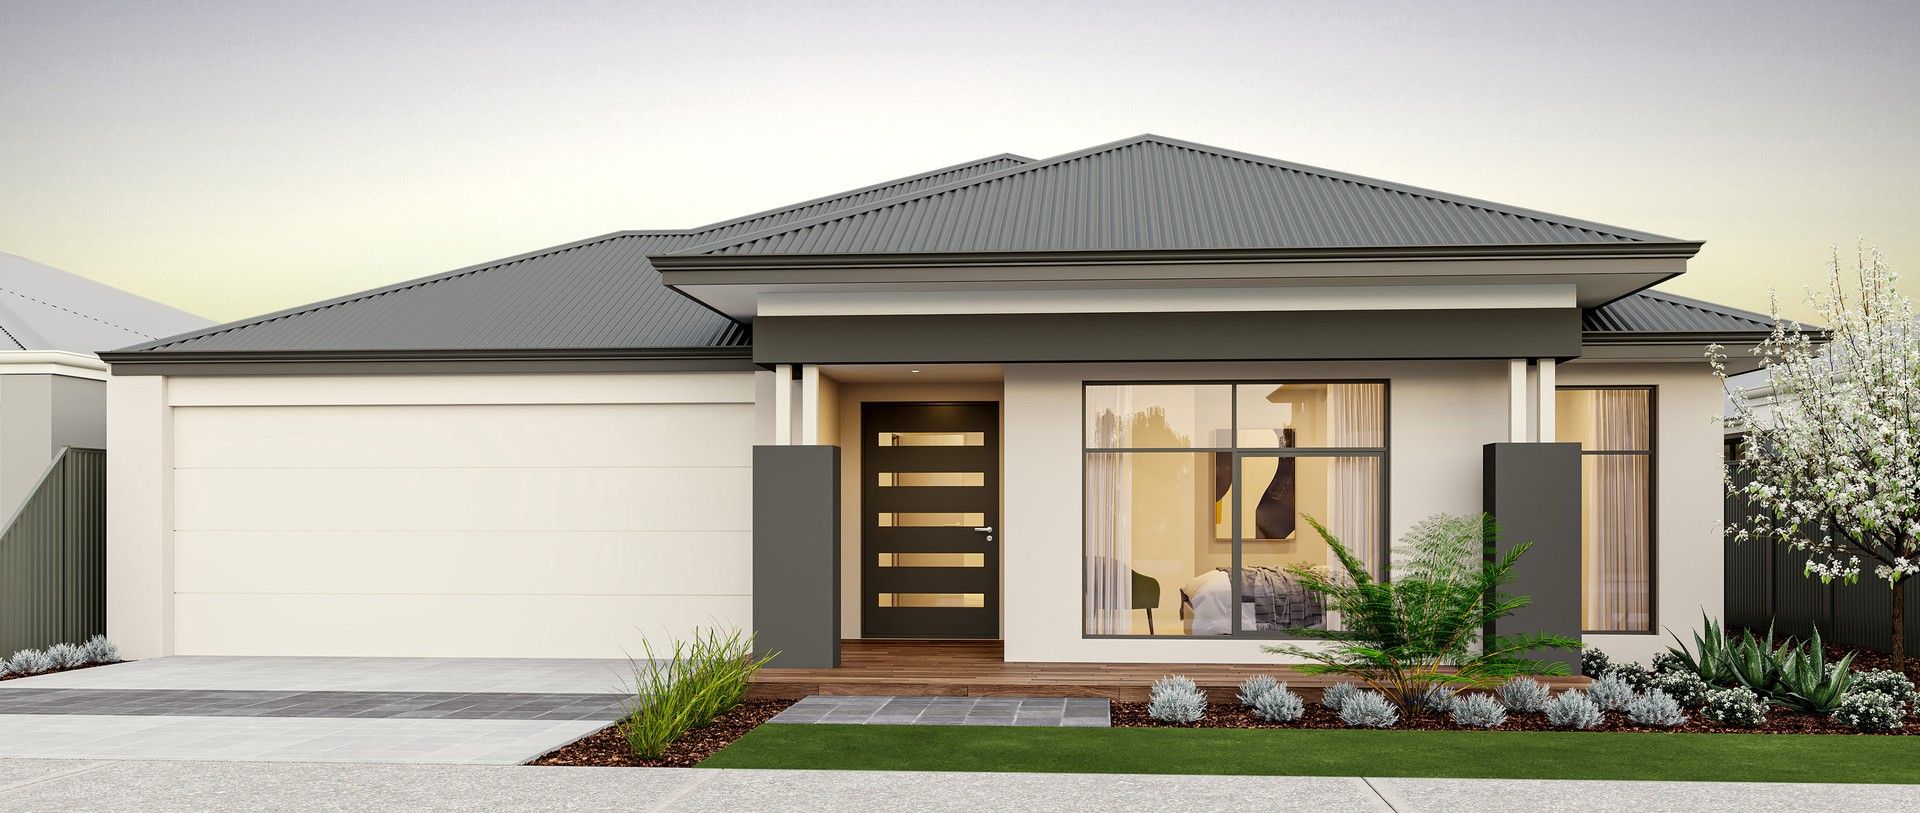 4 bedrooms New House & Land in Lot 72 Lillypilly Loop SINAGRA WA, 6065